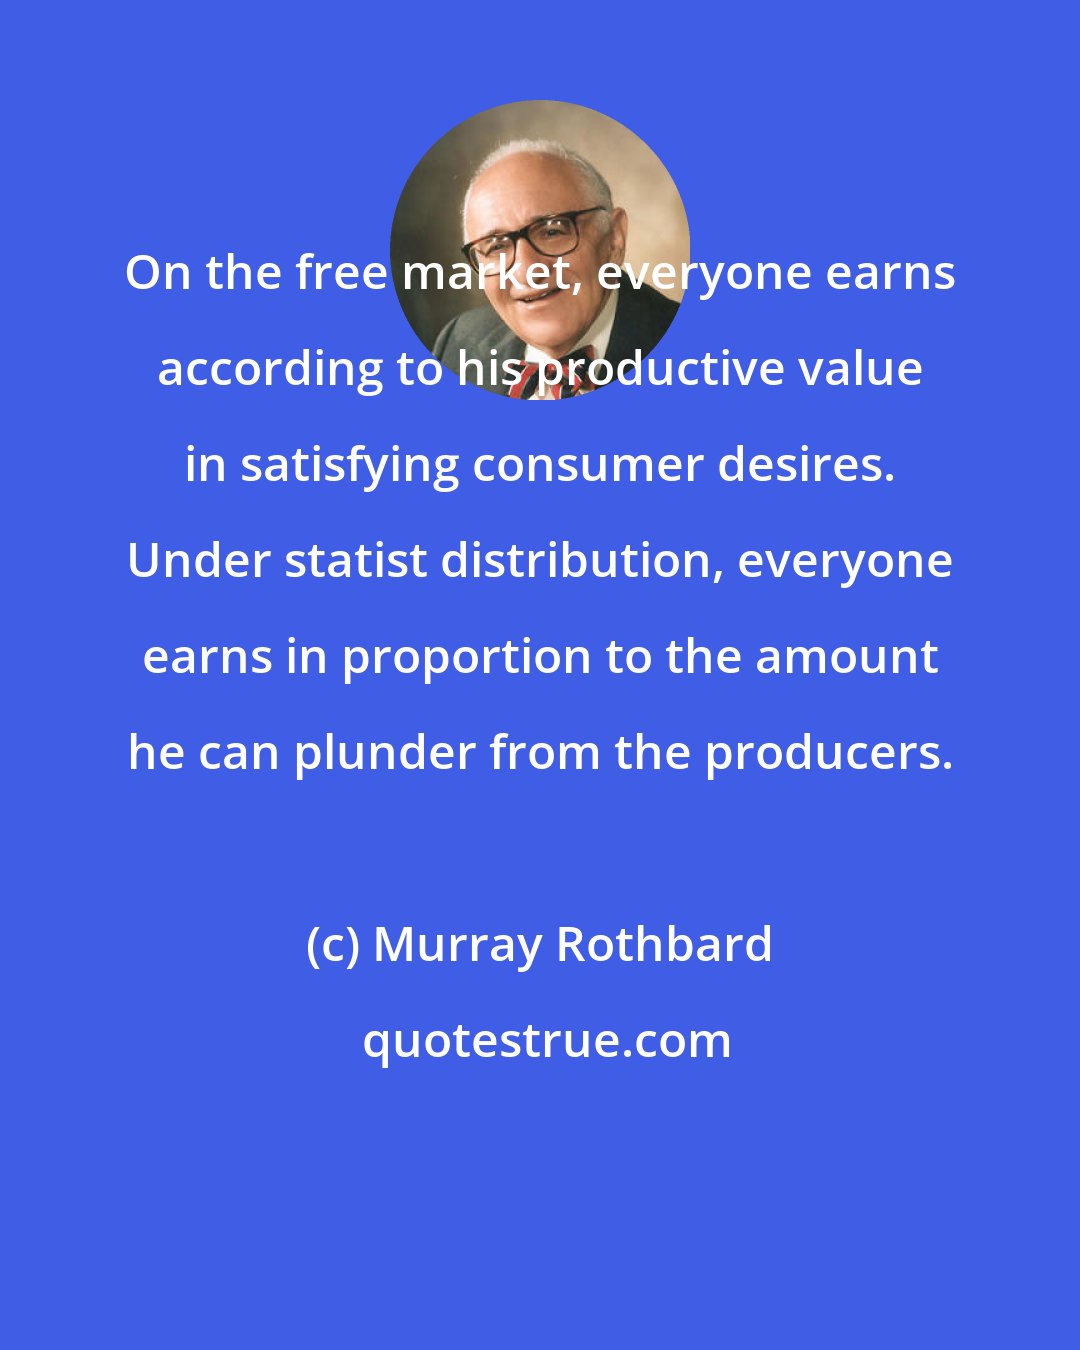 Murray Rothbard: On the free market, everyone earns according to his productive value in satisfying consumer desires. Under statist distribution, everyone earns in proportion to the amount he can plunder from the producers.